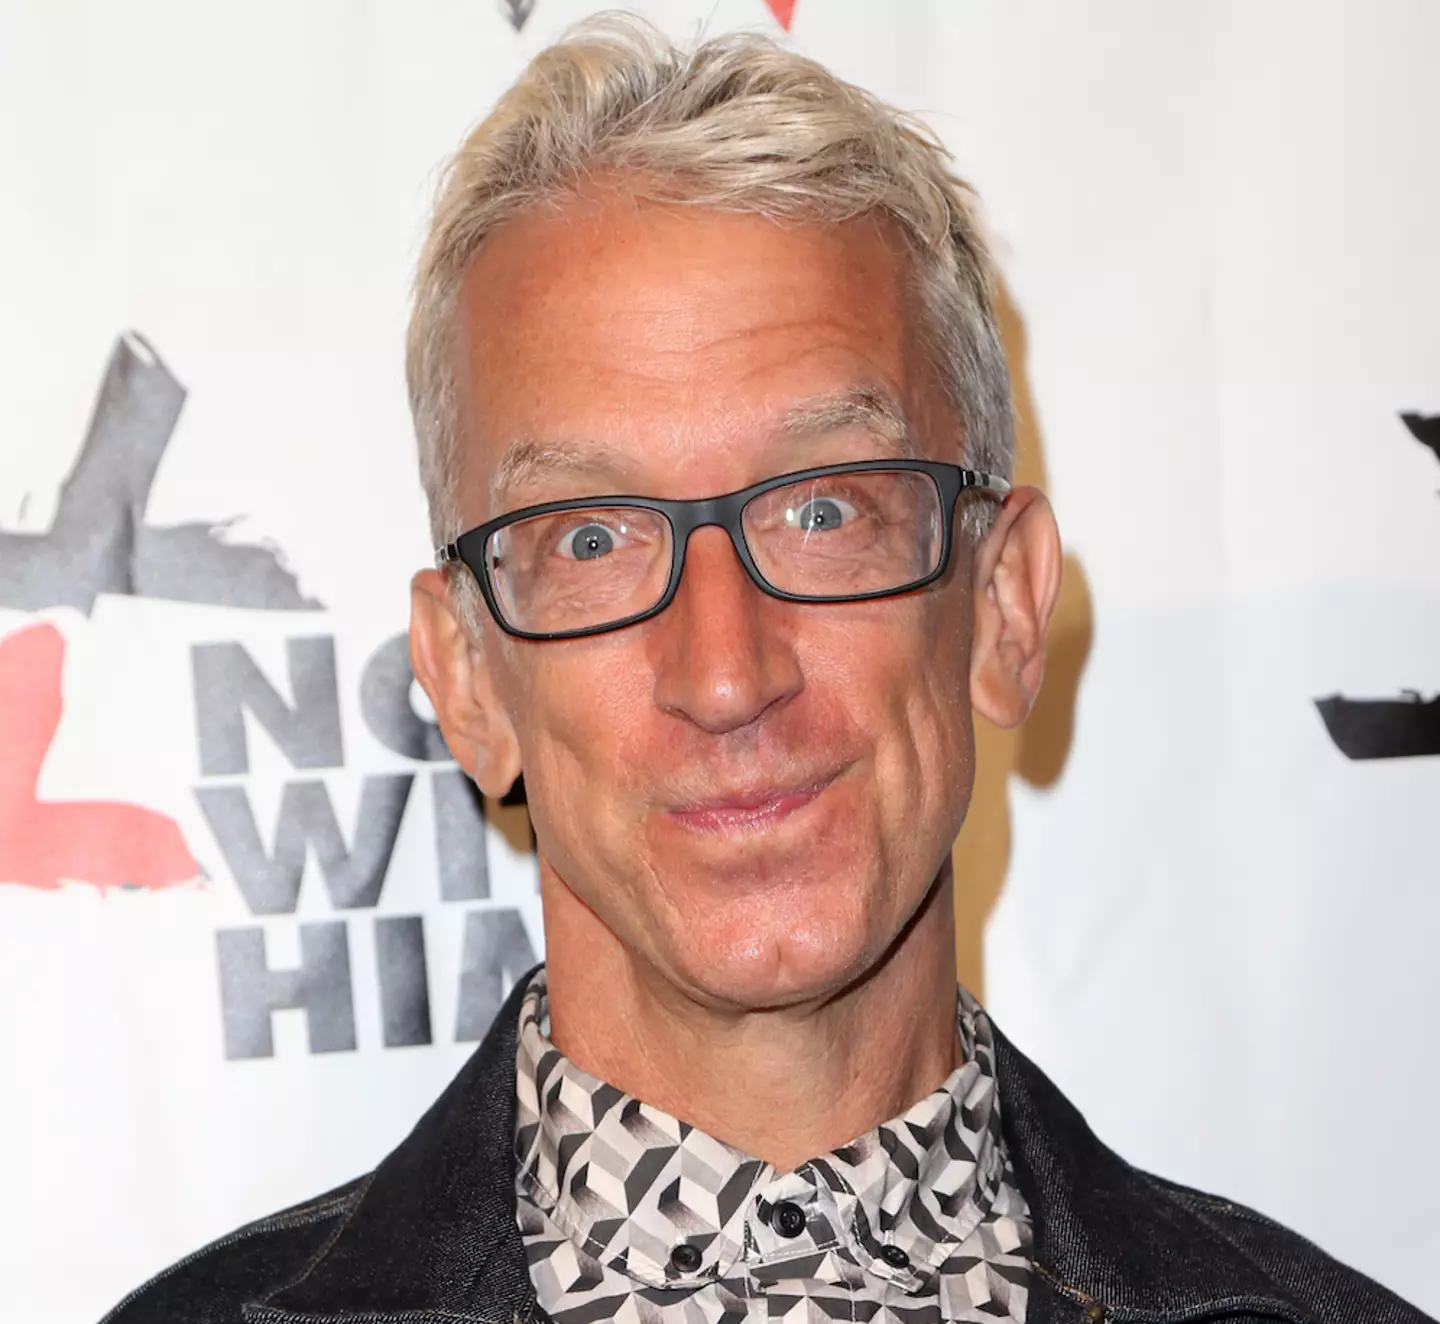 Andy Dick was arrested at a campground.